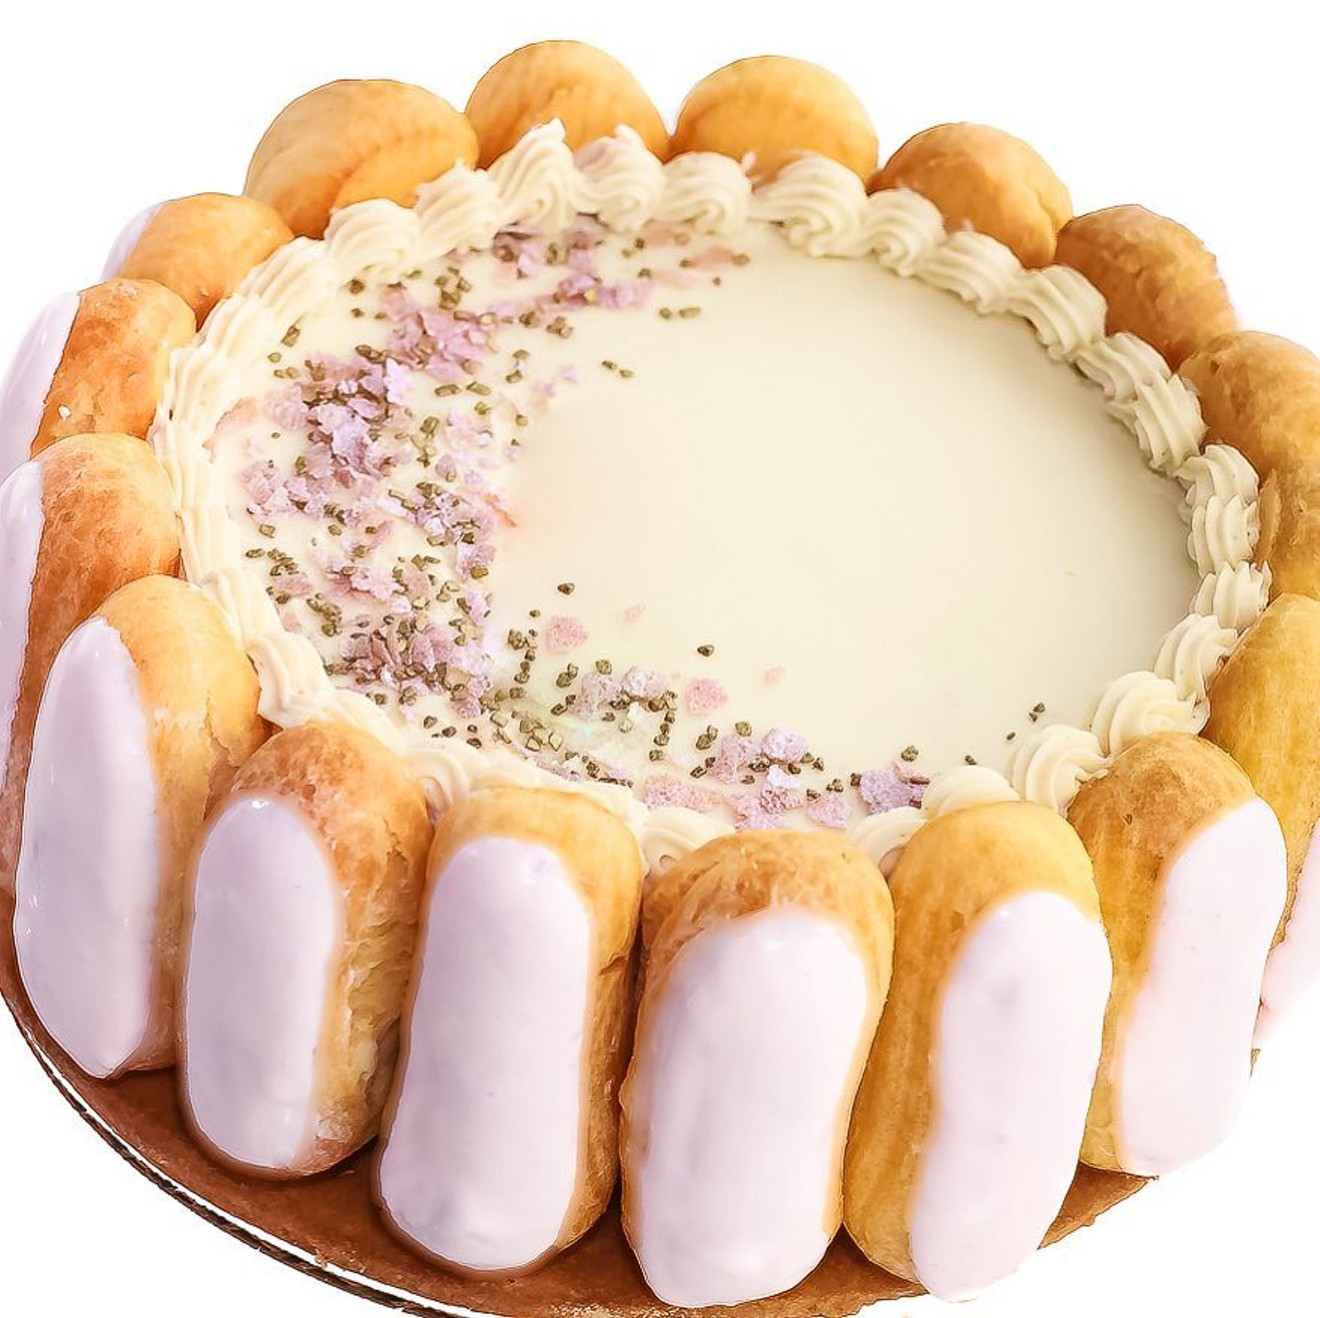 The Charlotte-Eclair is almost too pretty to eat. Almost.